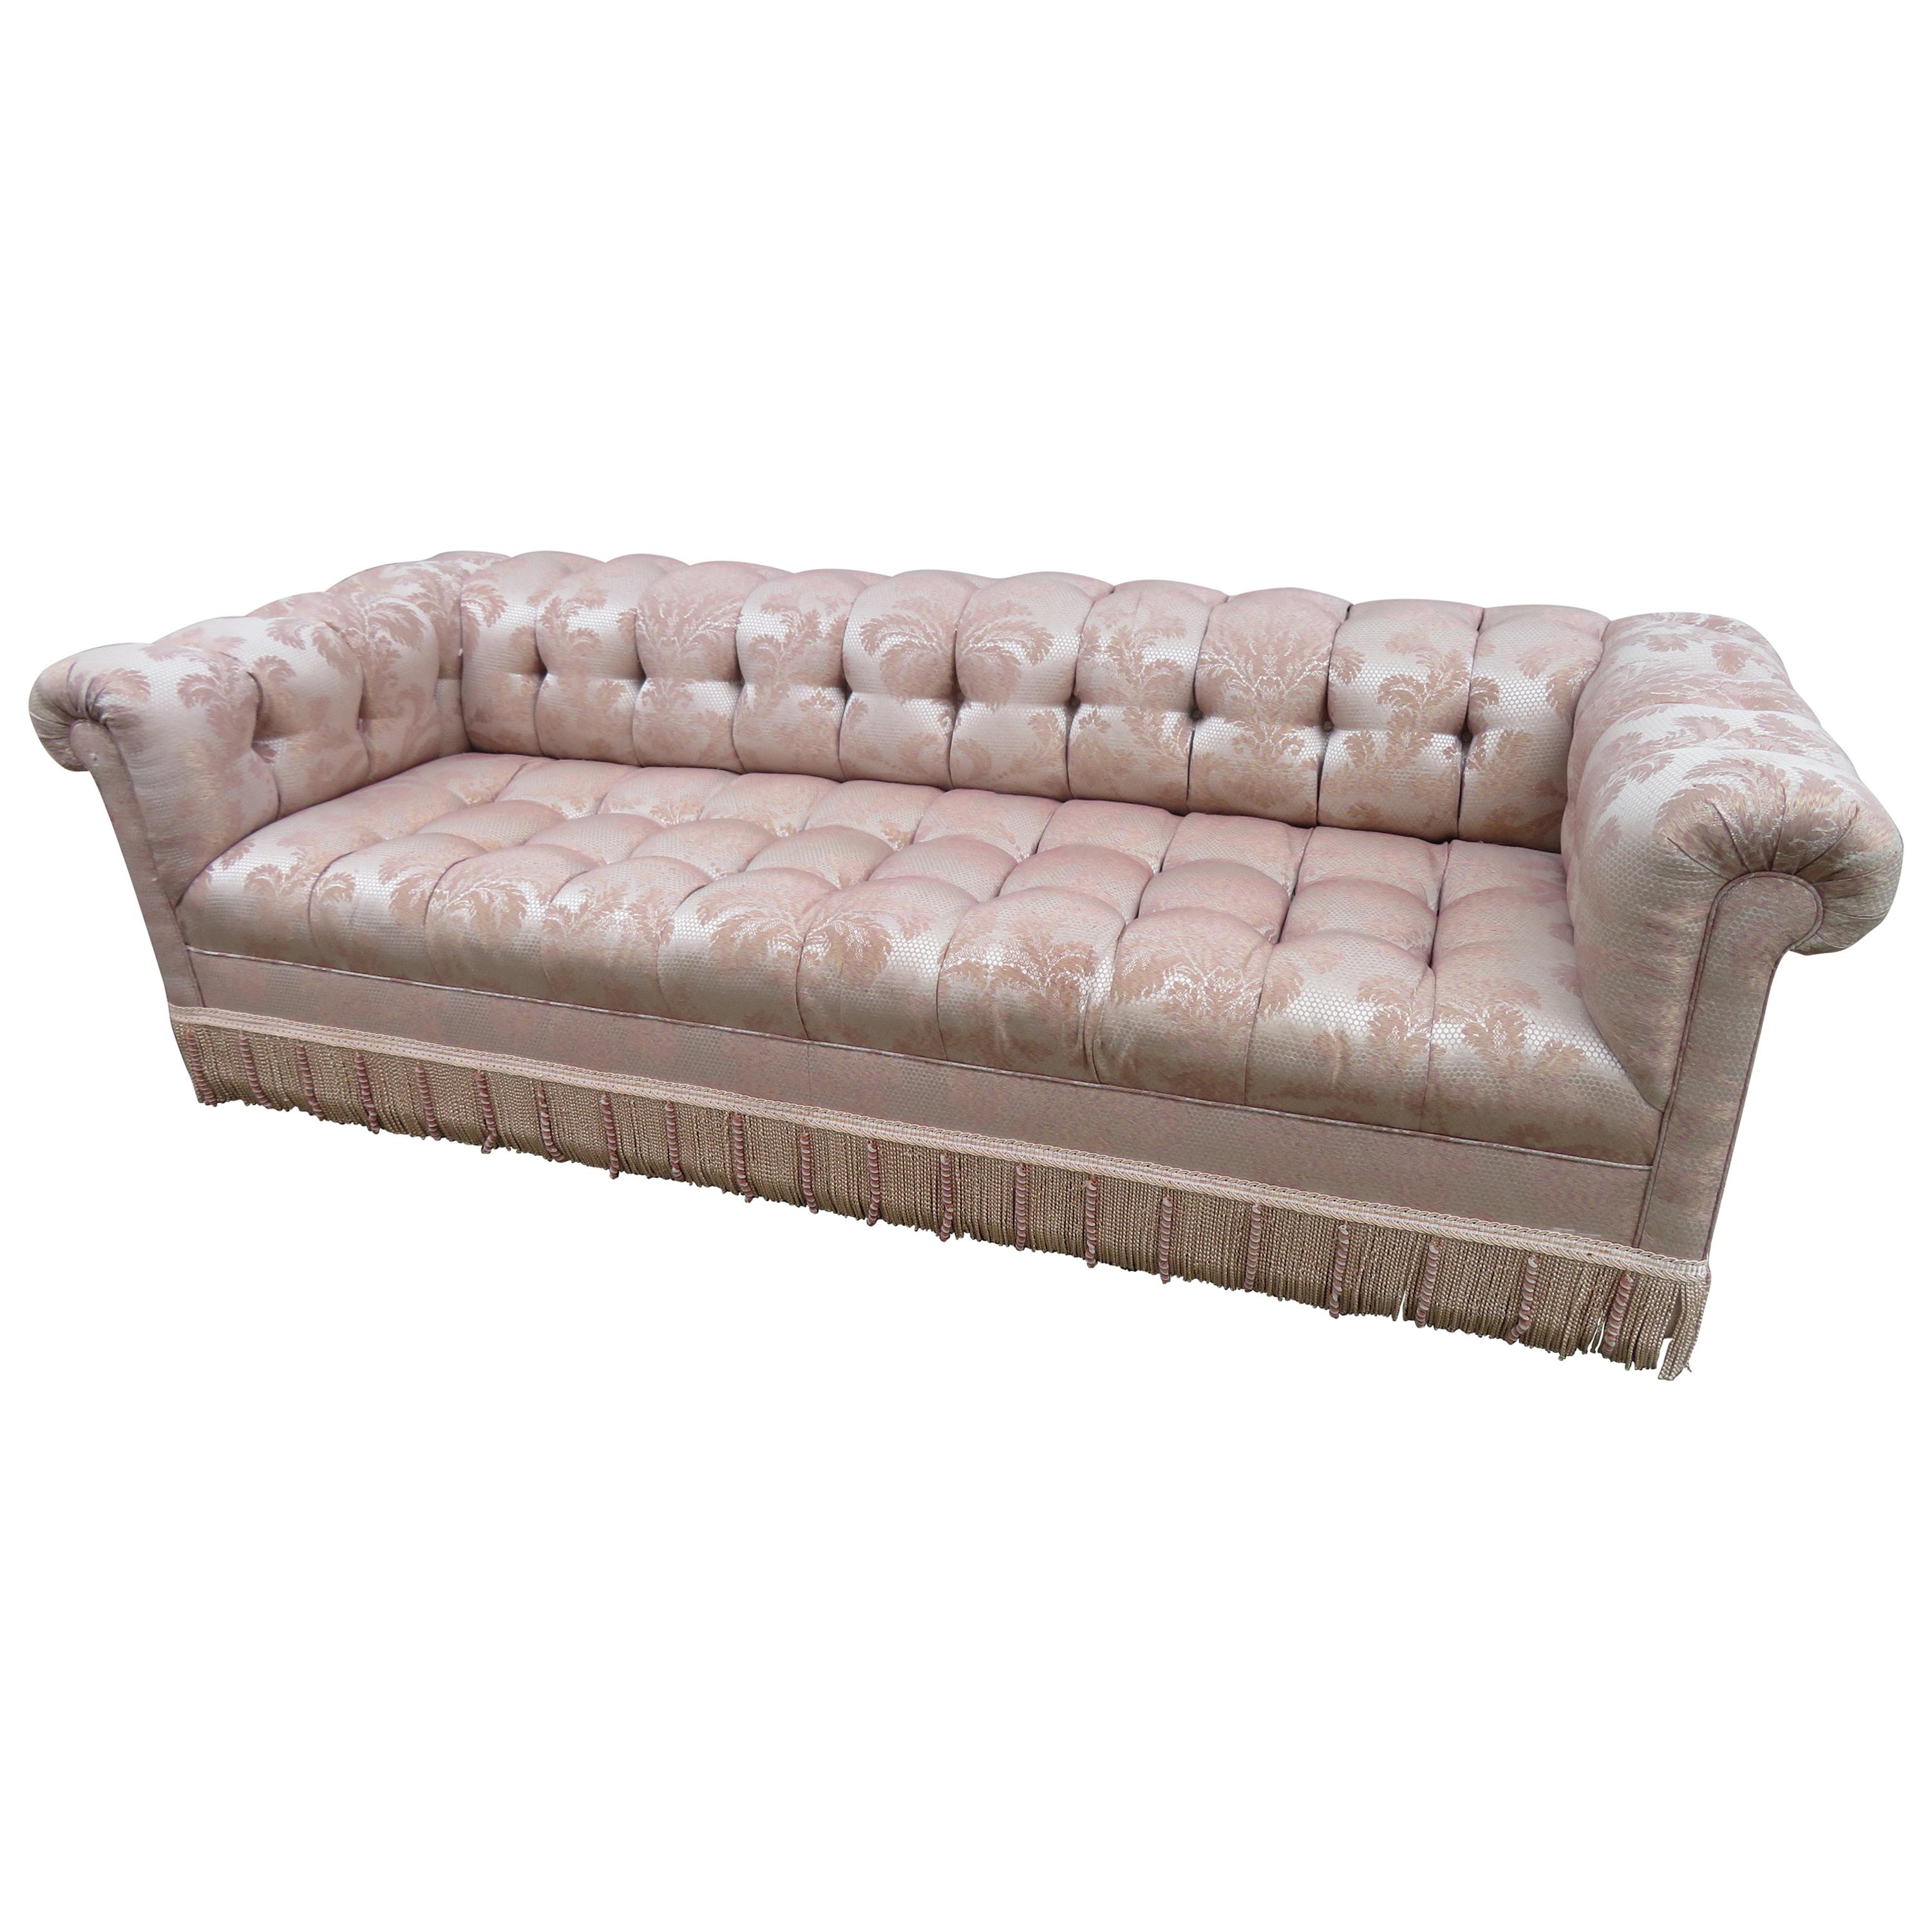 Magnificent Paul Evans for Directional Biscuit Tufted Party Sofa Midcentury